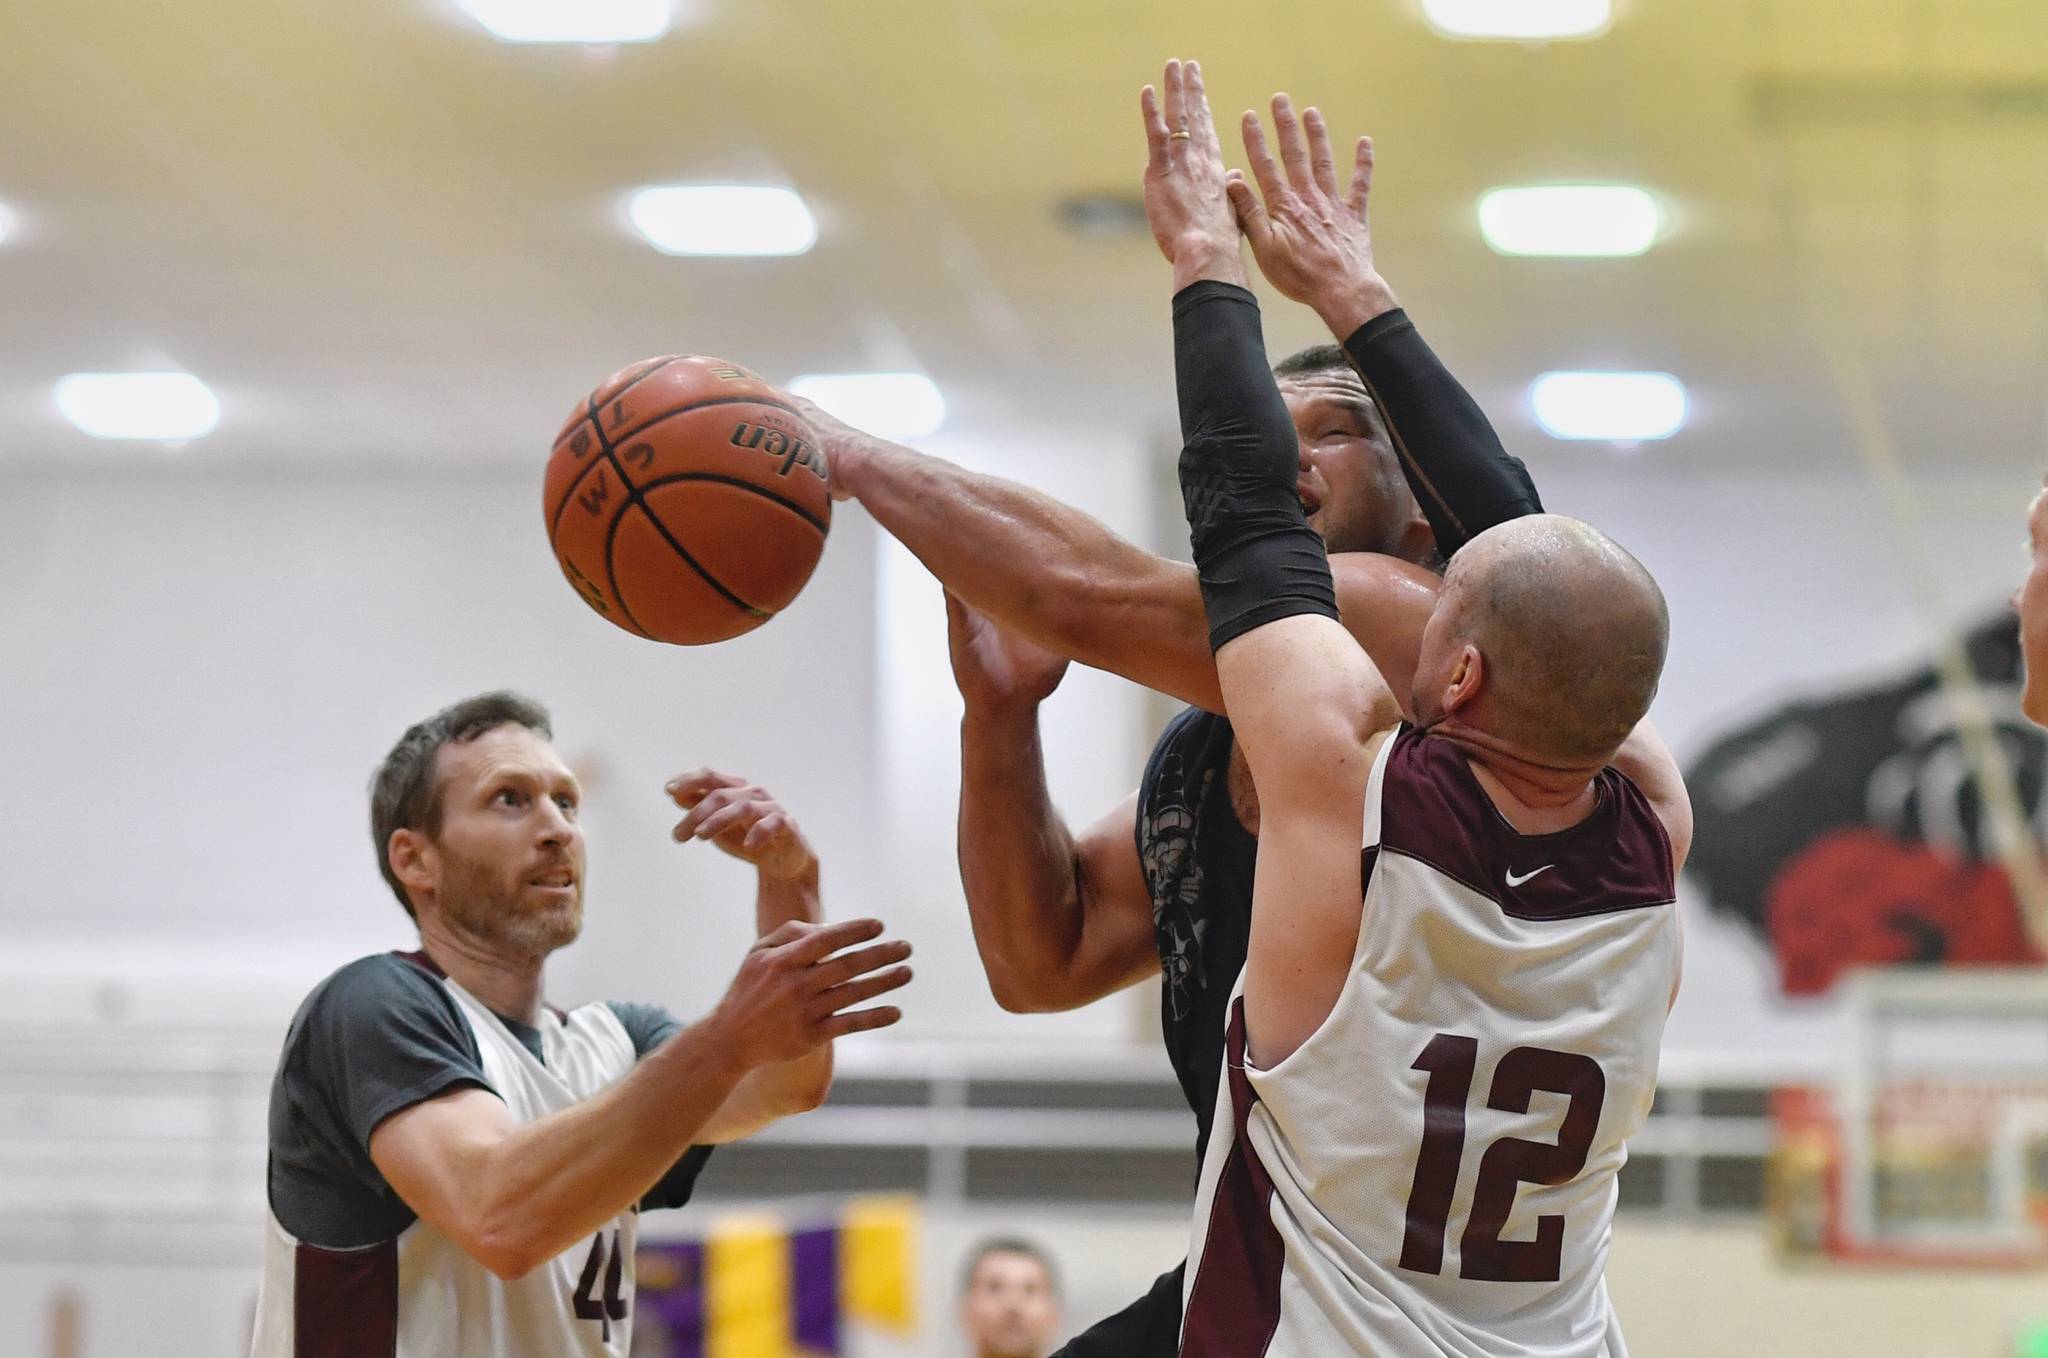 Hydaburg’s Kevin Young has his shot blocked by Klukwan’s Andrew’s Friske, left, and Jason Shull in the C bracket final at the Gold Medal Basketball Tournament on Saturday, March 23, 2019. (Michael Penn | Juneau Empire)